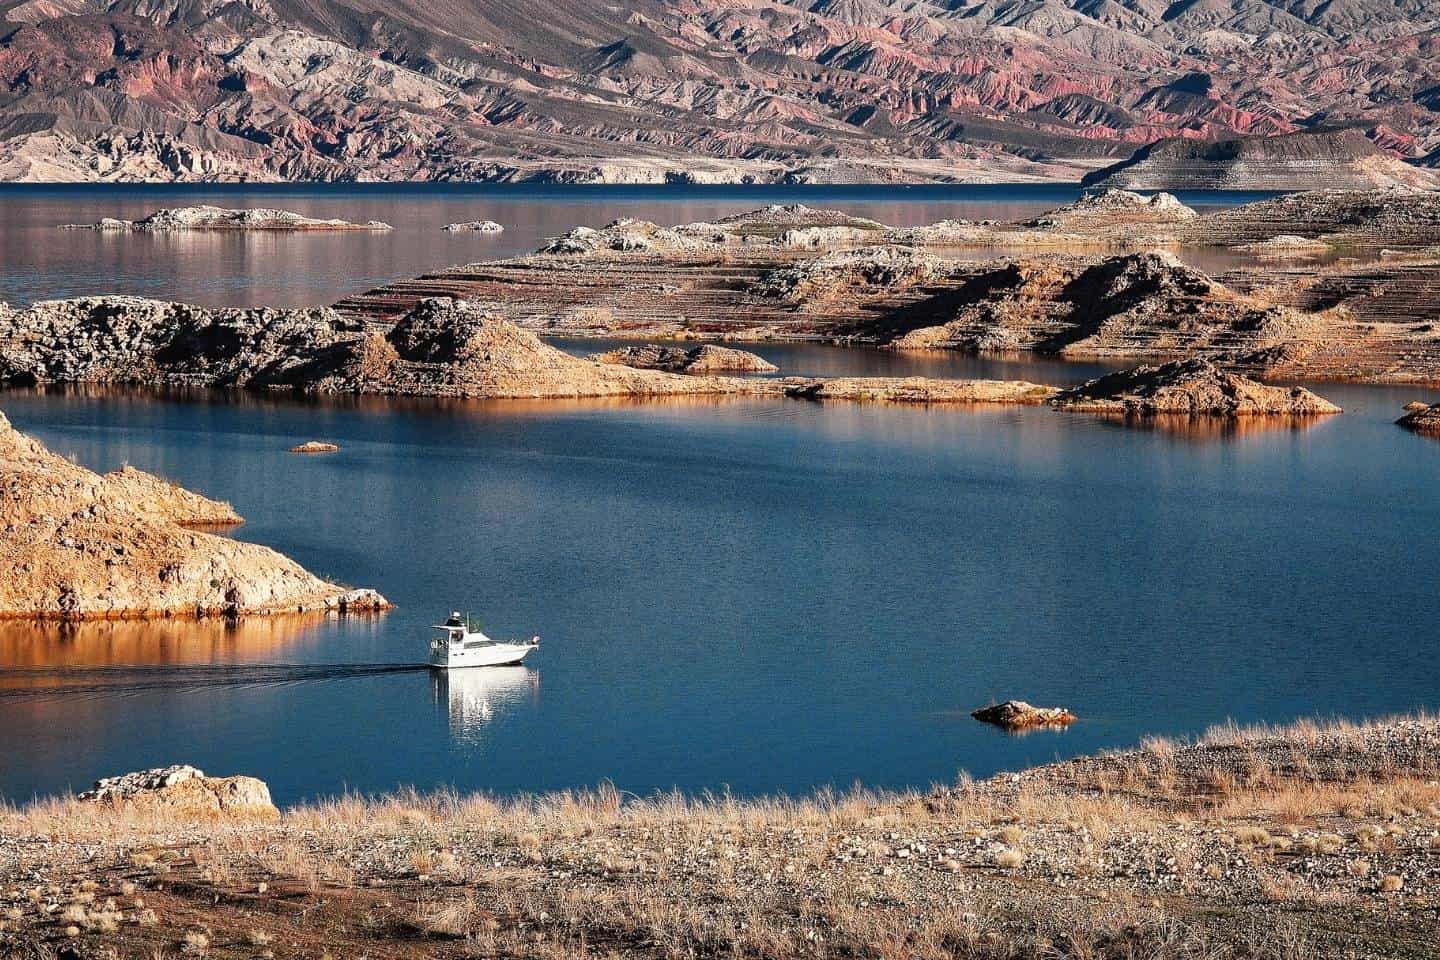 Cruise boat at Lake Mead